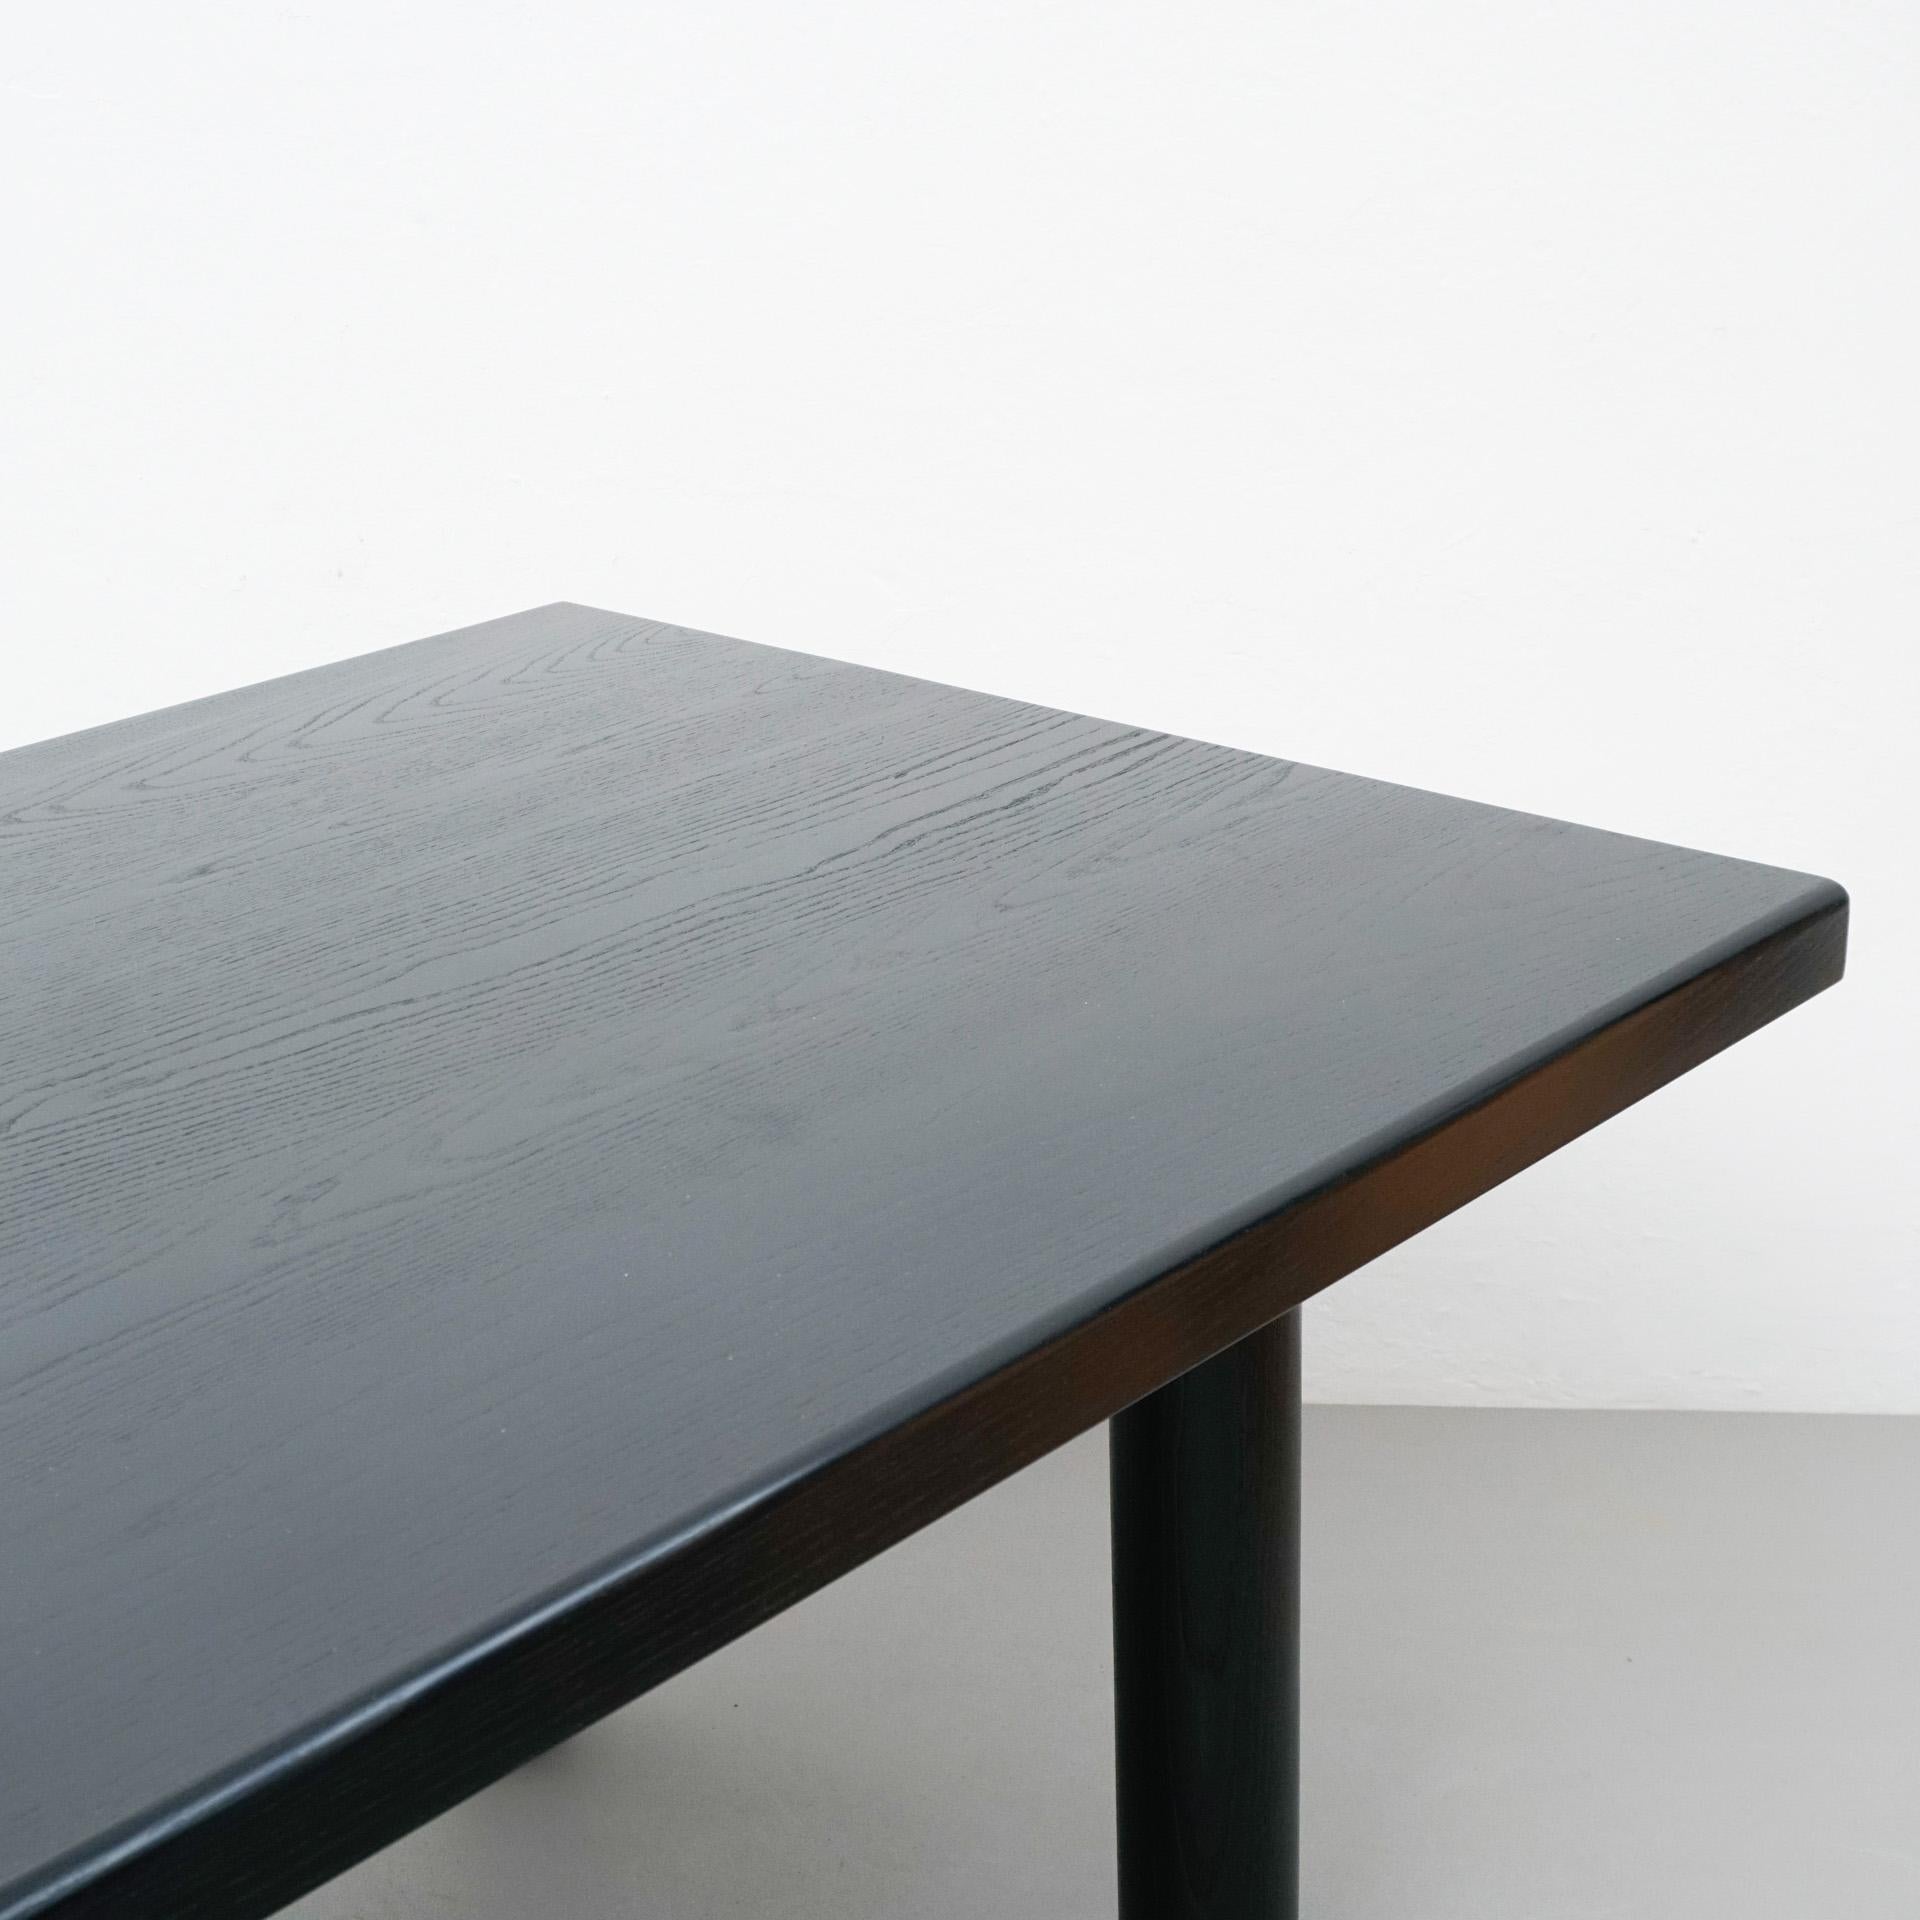 Dada Est. Contemporary Solid Ash Wood Black Lacquered Dining Table In New Condition For Sale In Barcelona, Barcelona